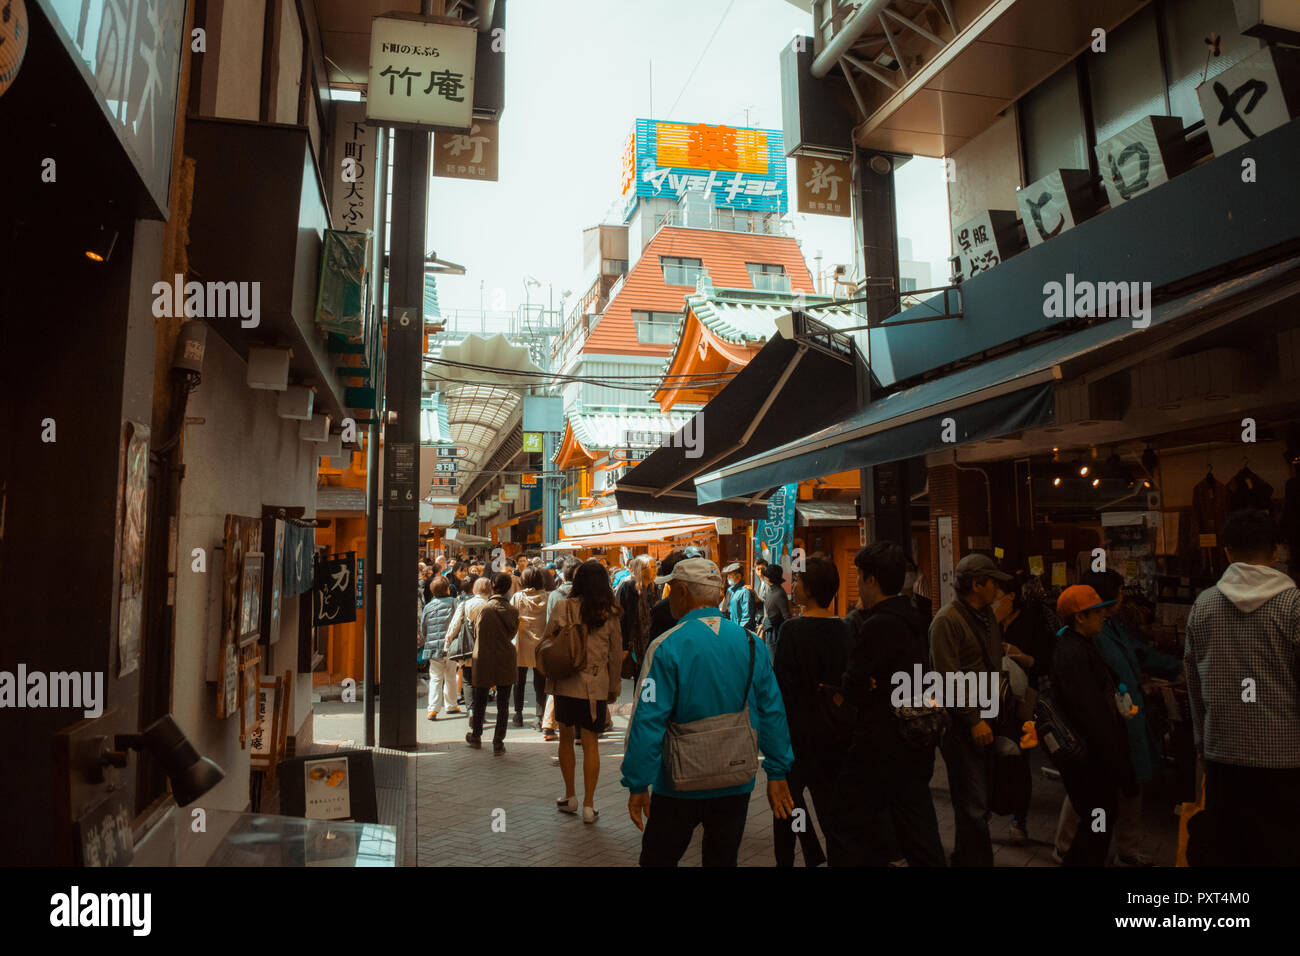 Japan streeet photography. Alley with shops, locals and tourists. Stock Photo